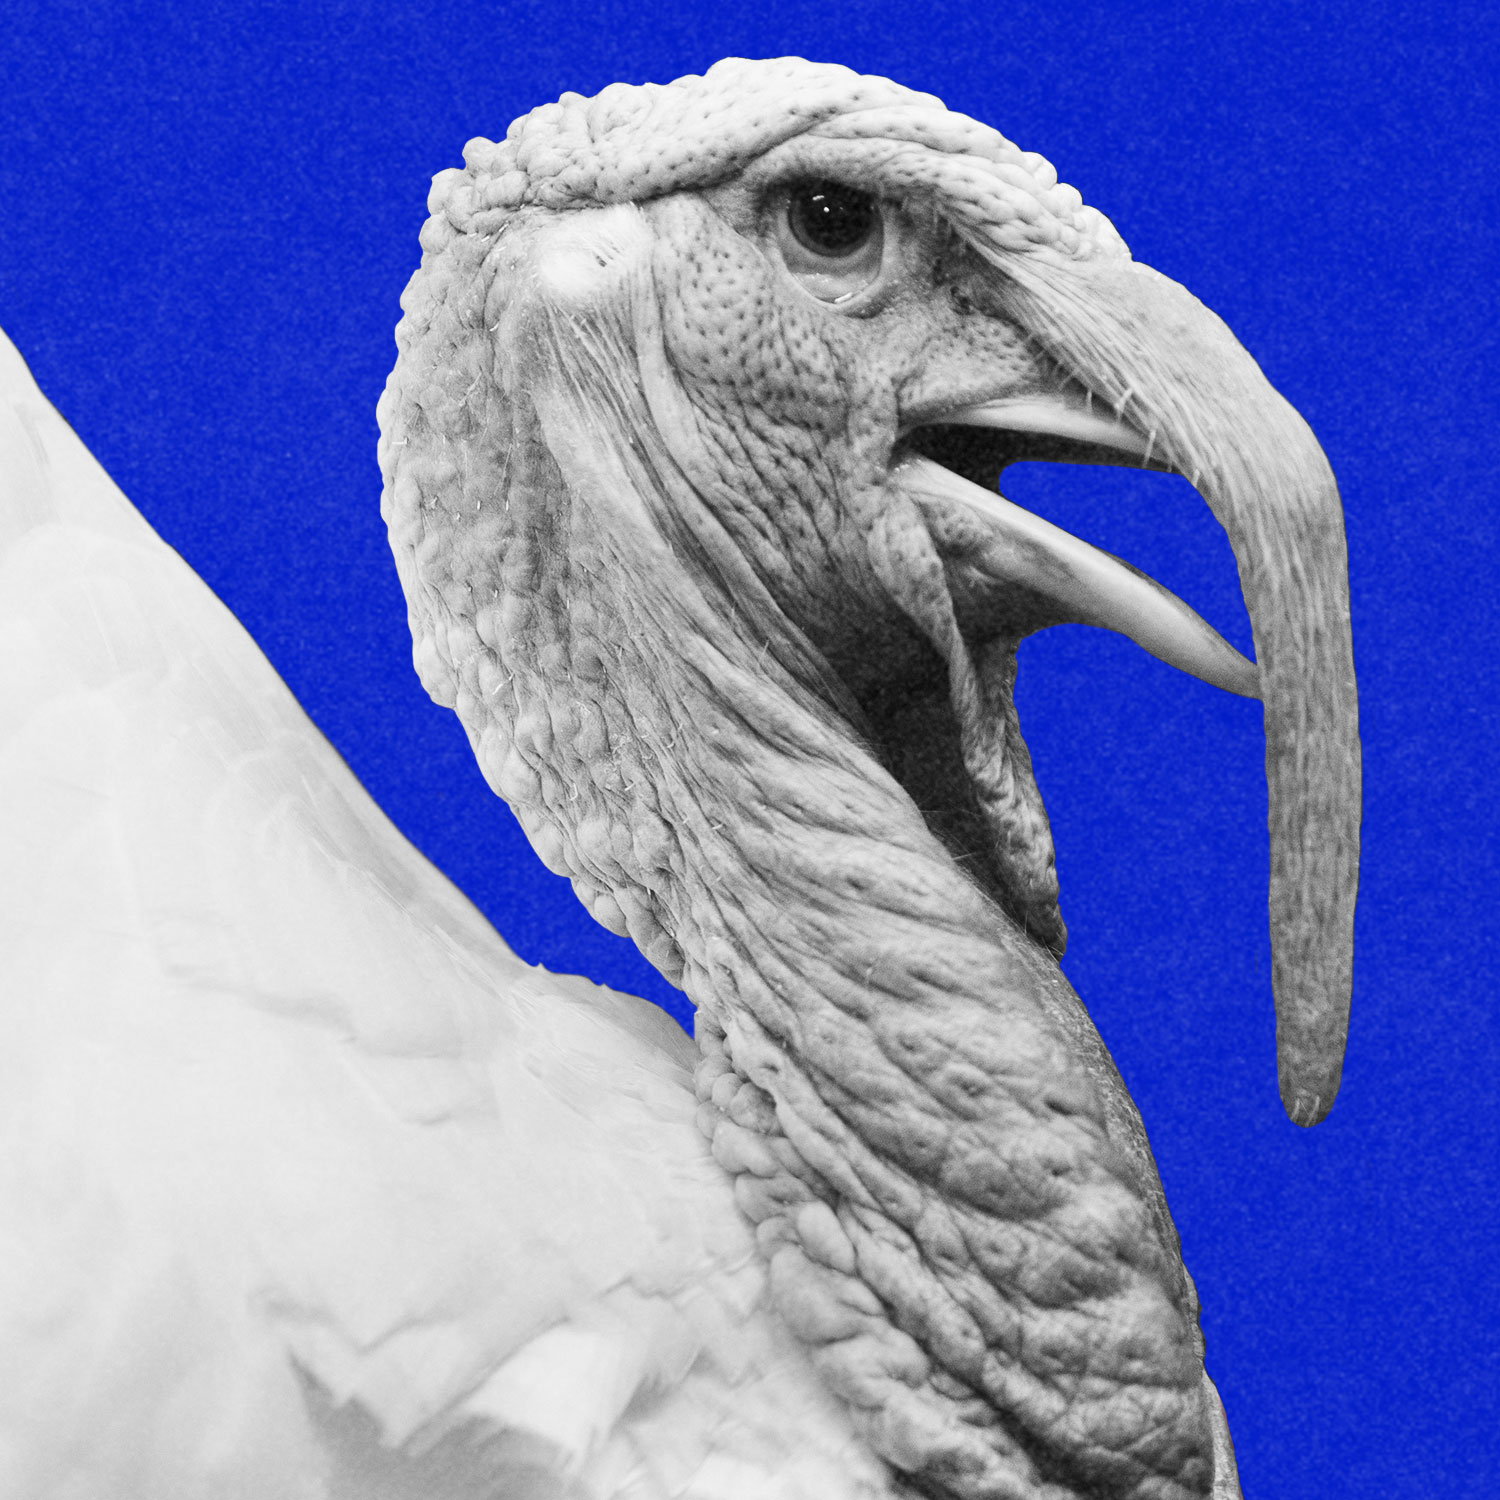 Why do American presidents pardon turkeys anyway? A holiday episode.